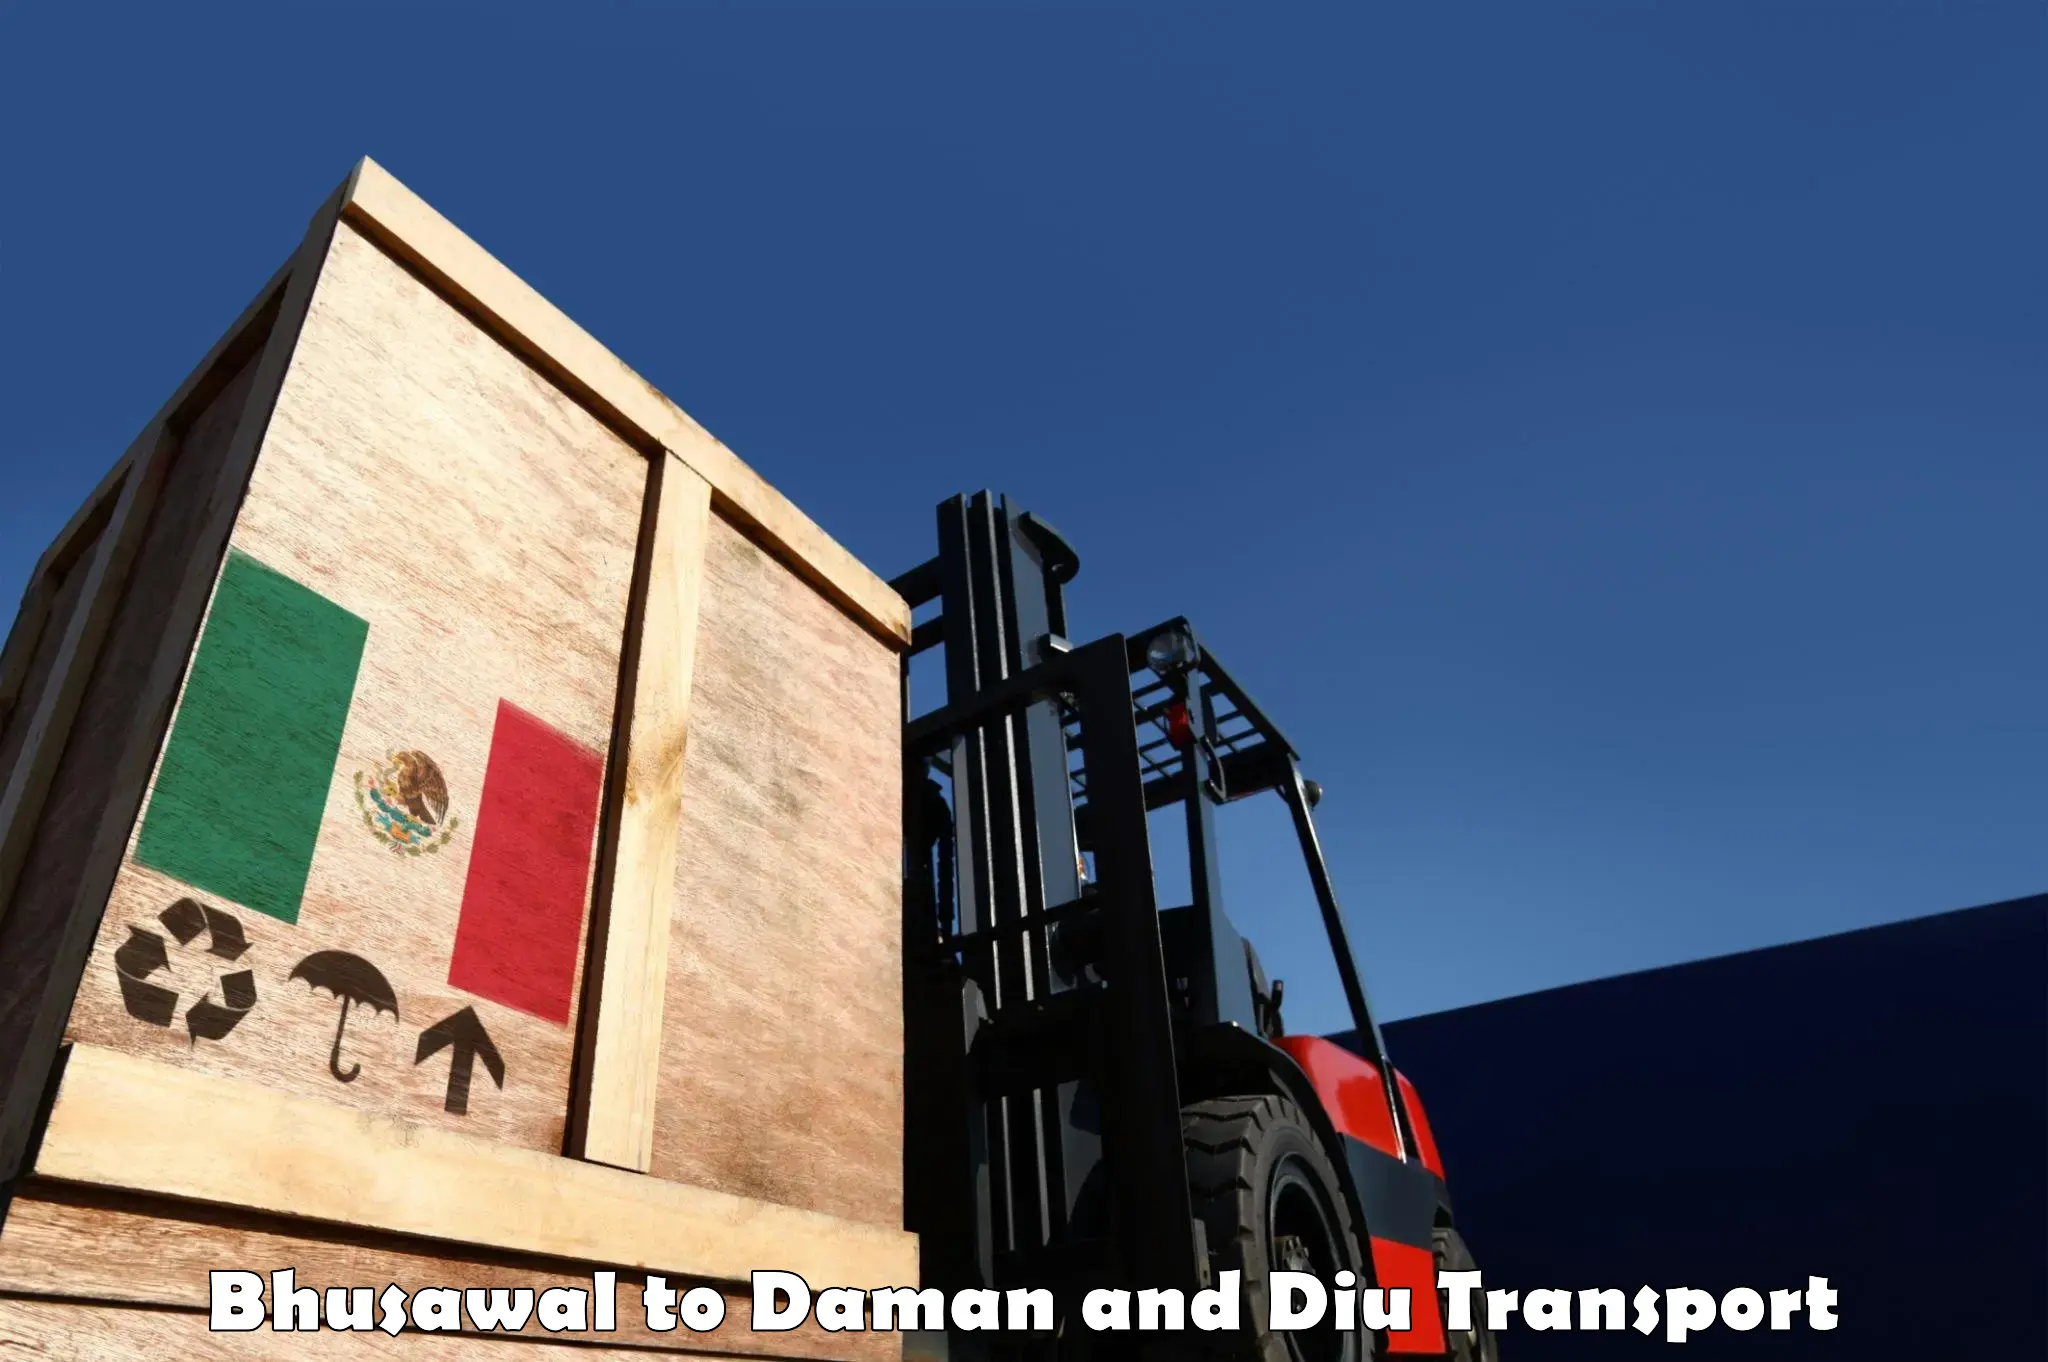 Container transport service Bhusawal to Daman and Diu